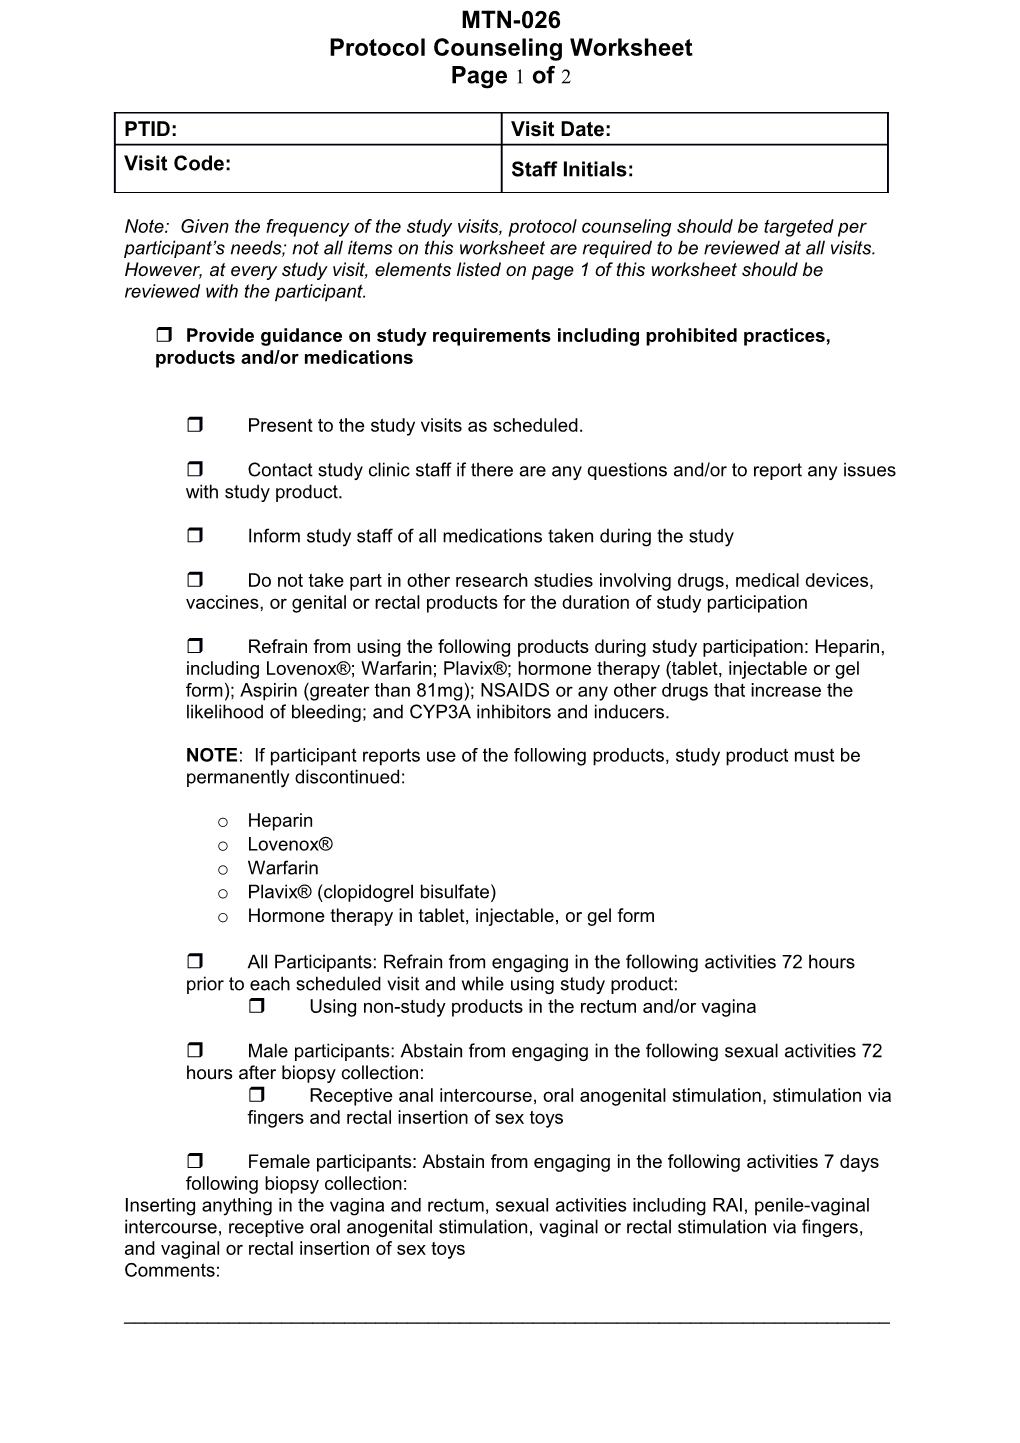 Protocol Counseling Worksheet